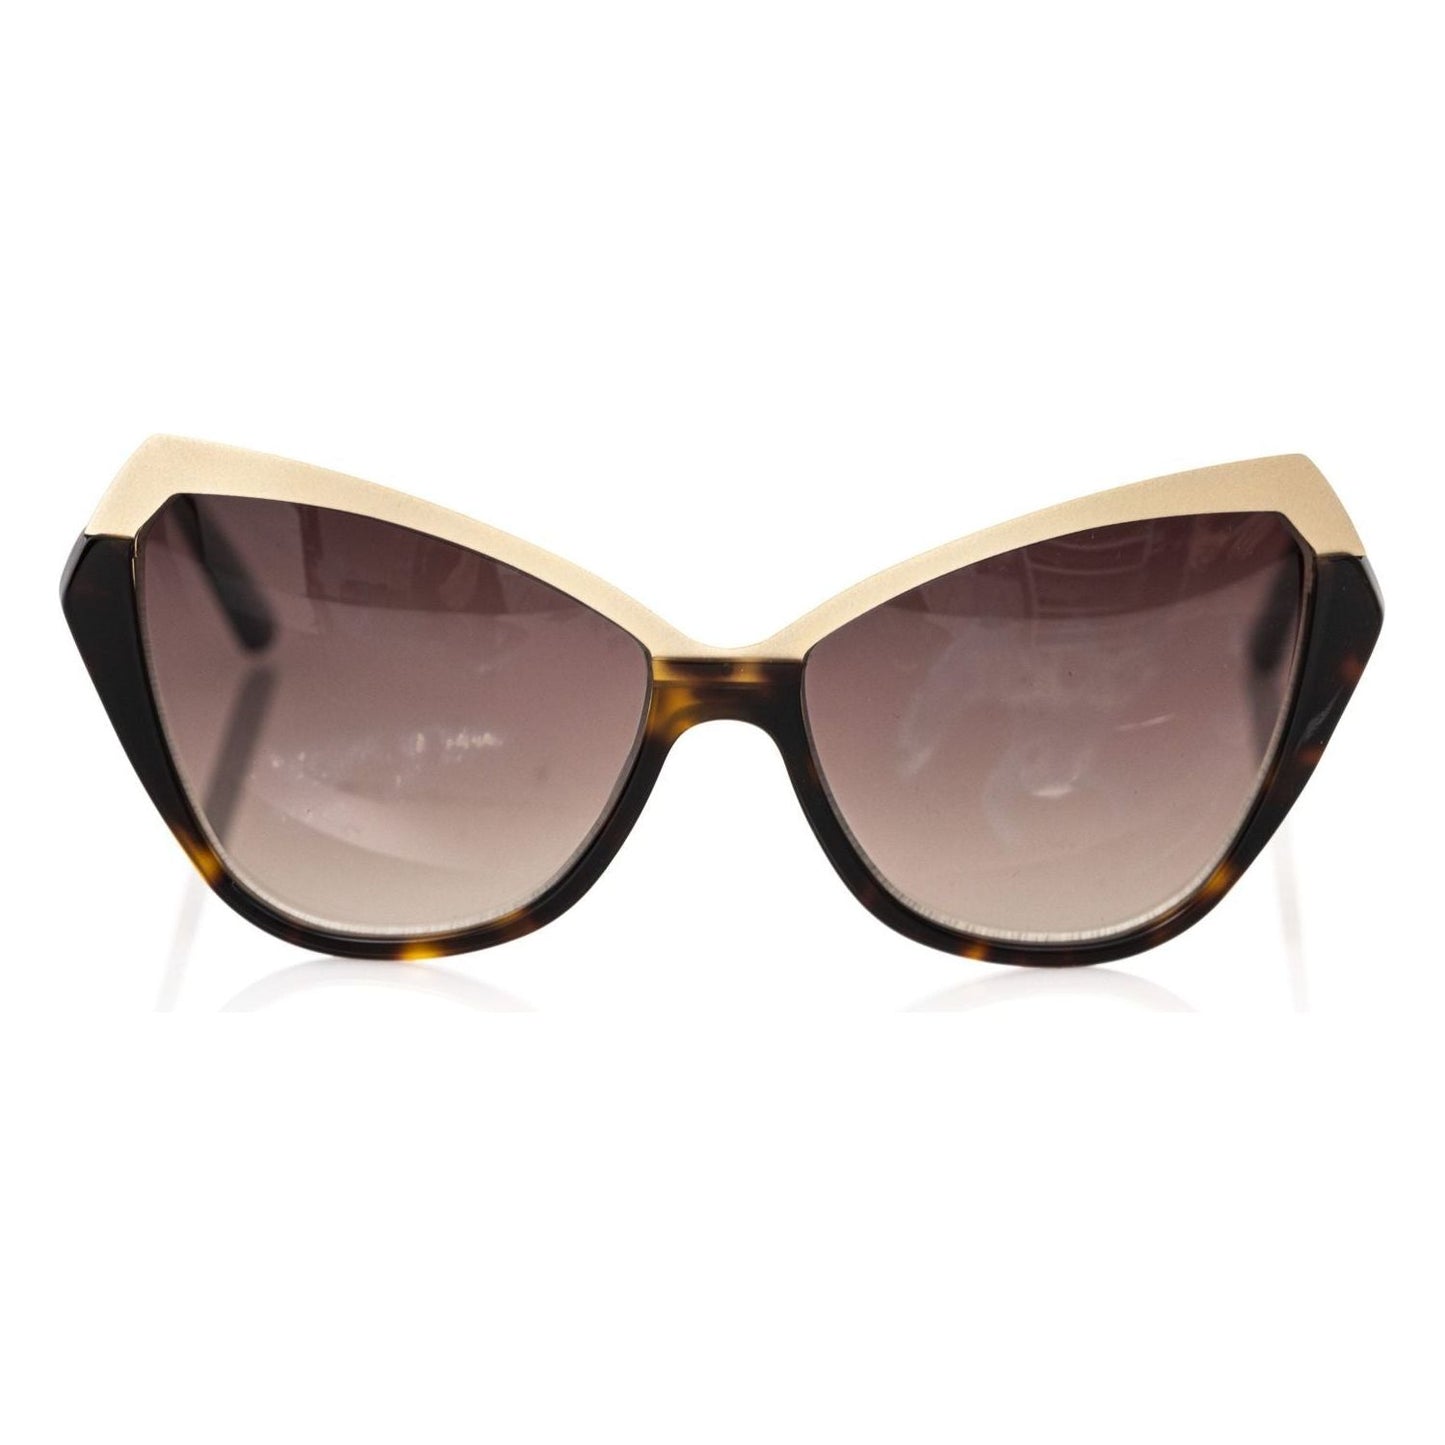 Chic Cat Eye Sunglasses with Gold Accents Frankie Morello